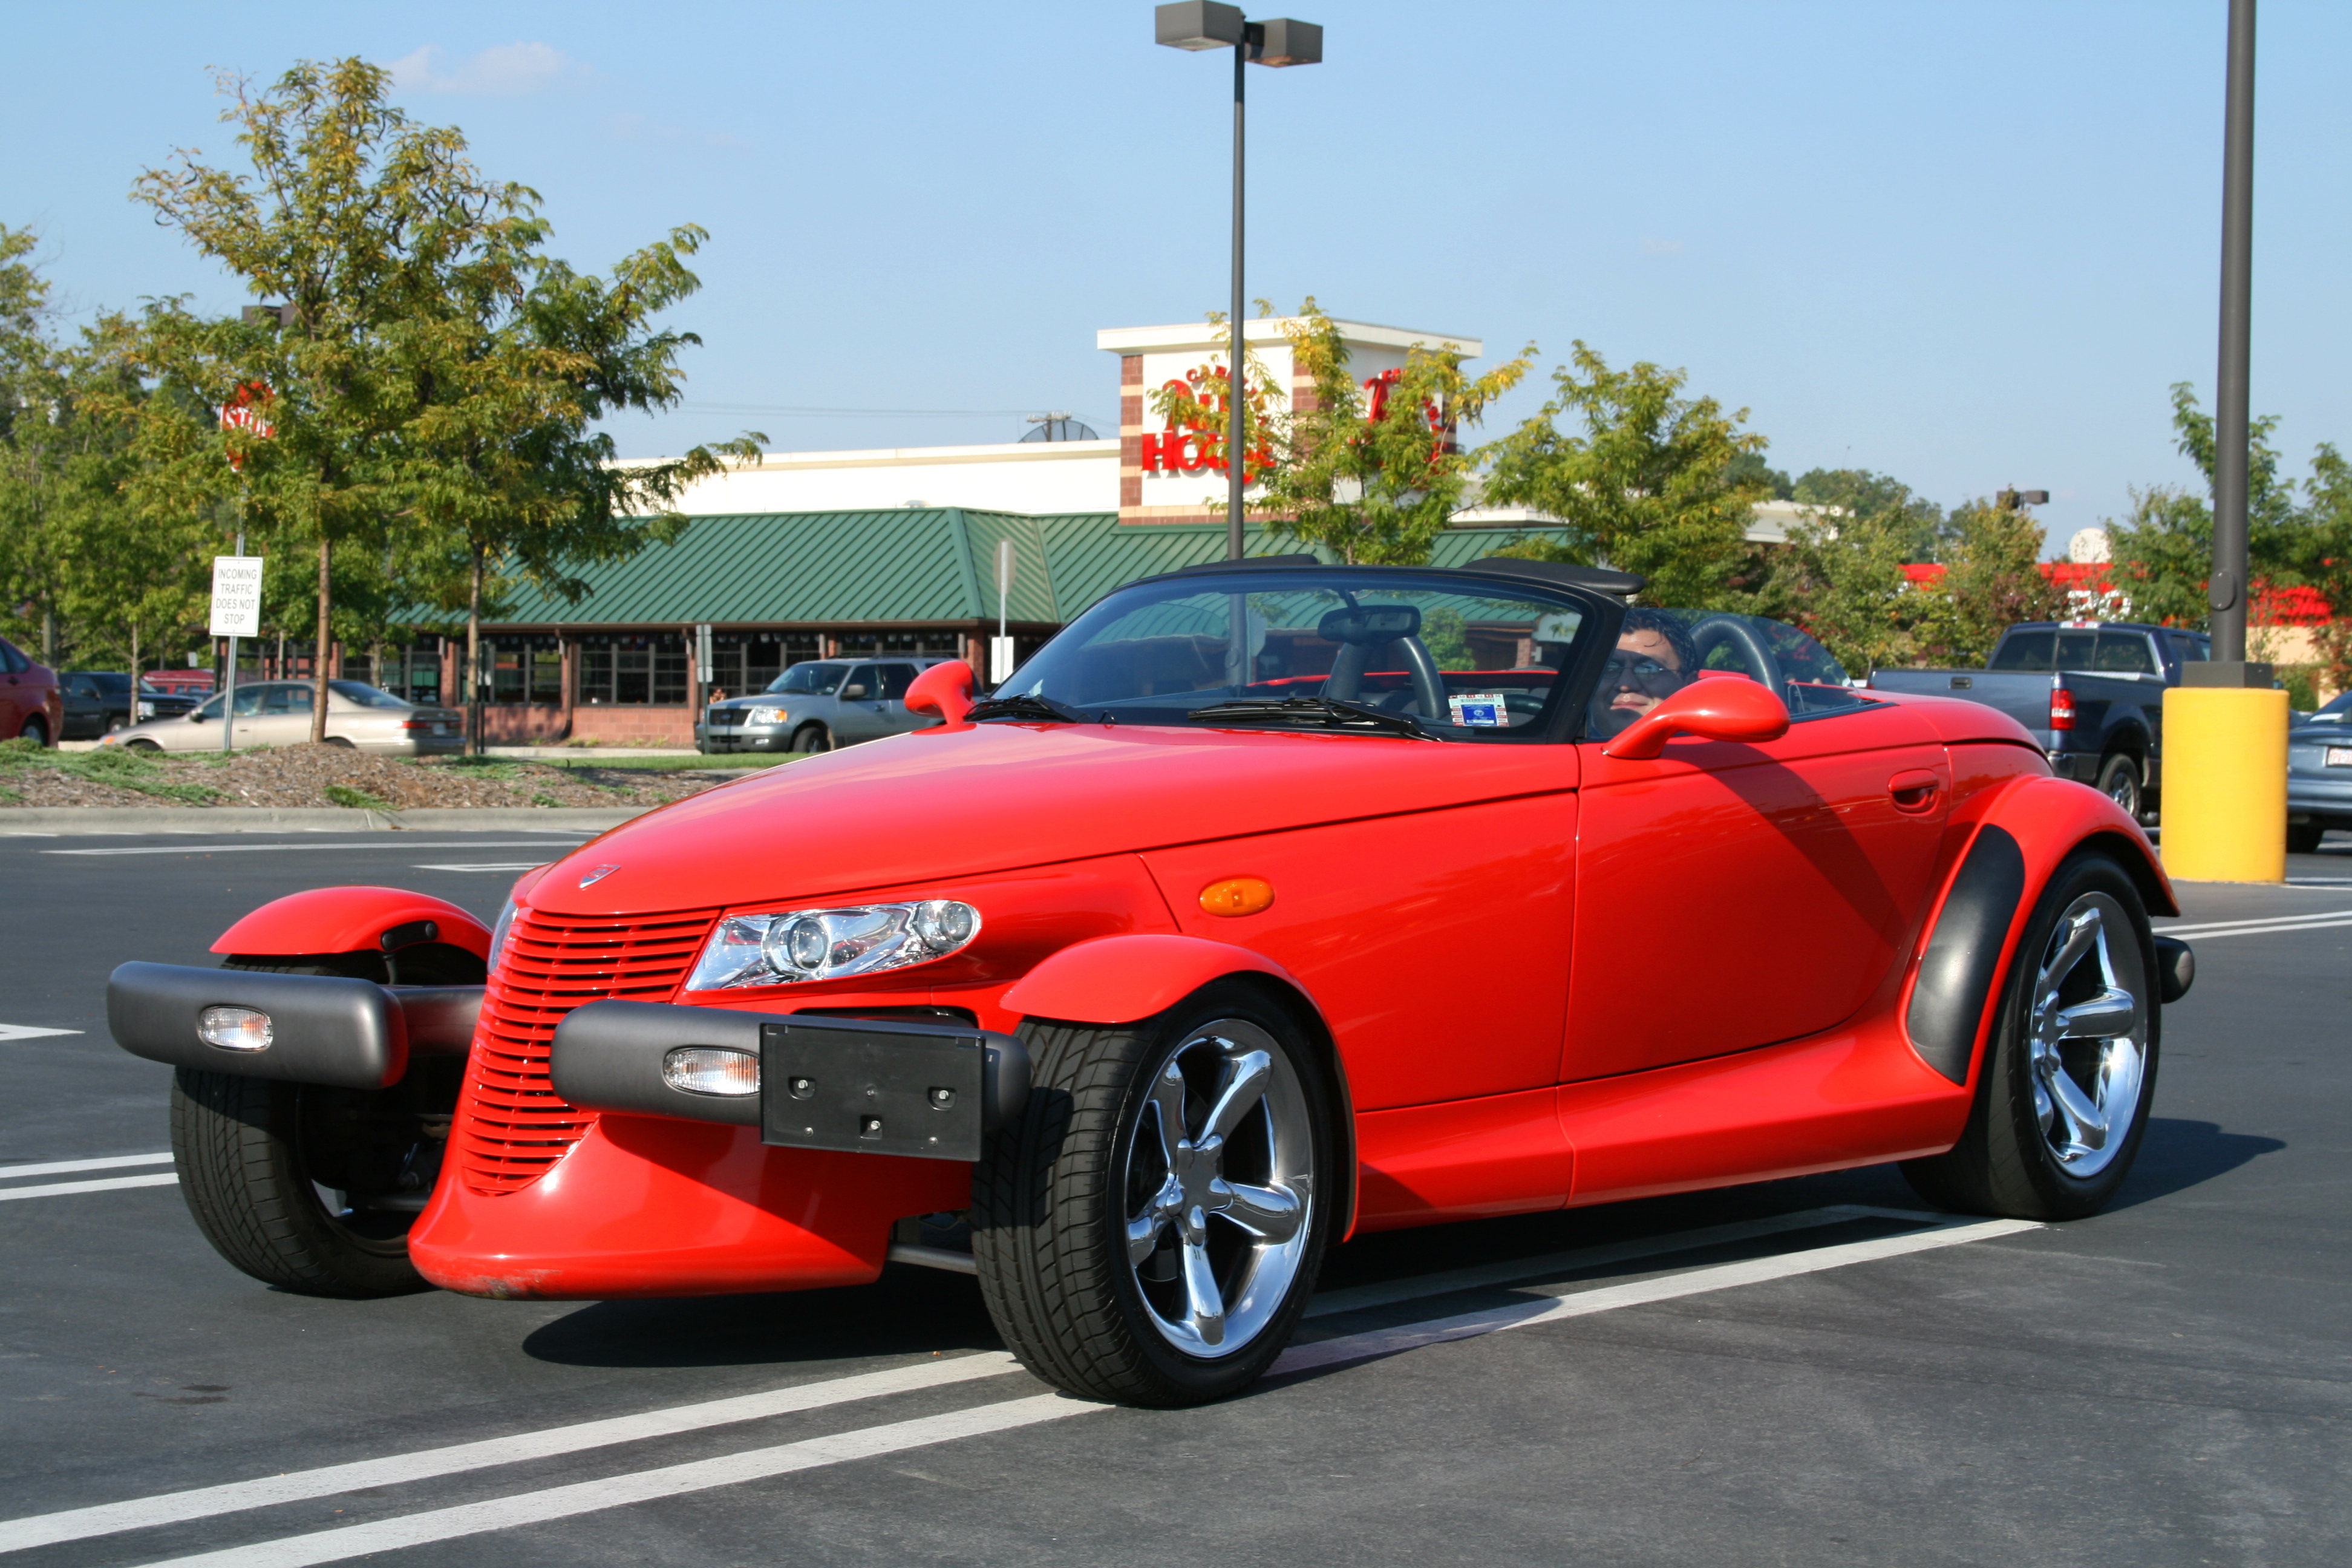 2008-10-05 Red Plymouth Prowler at South Square